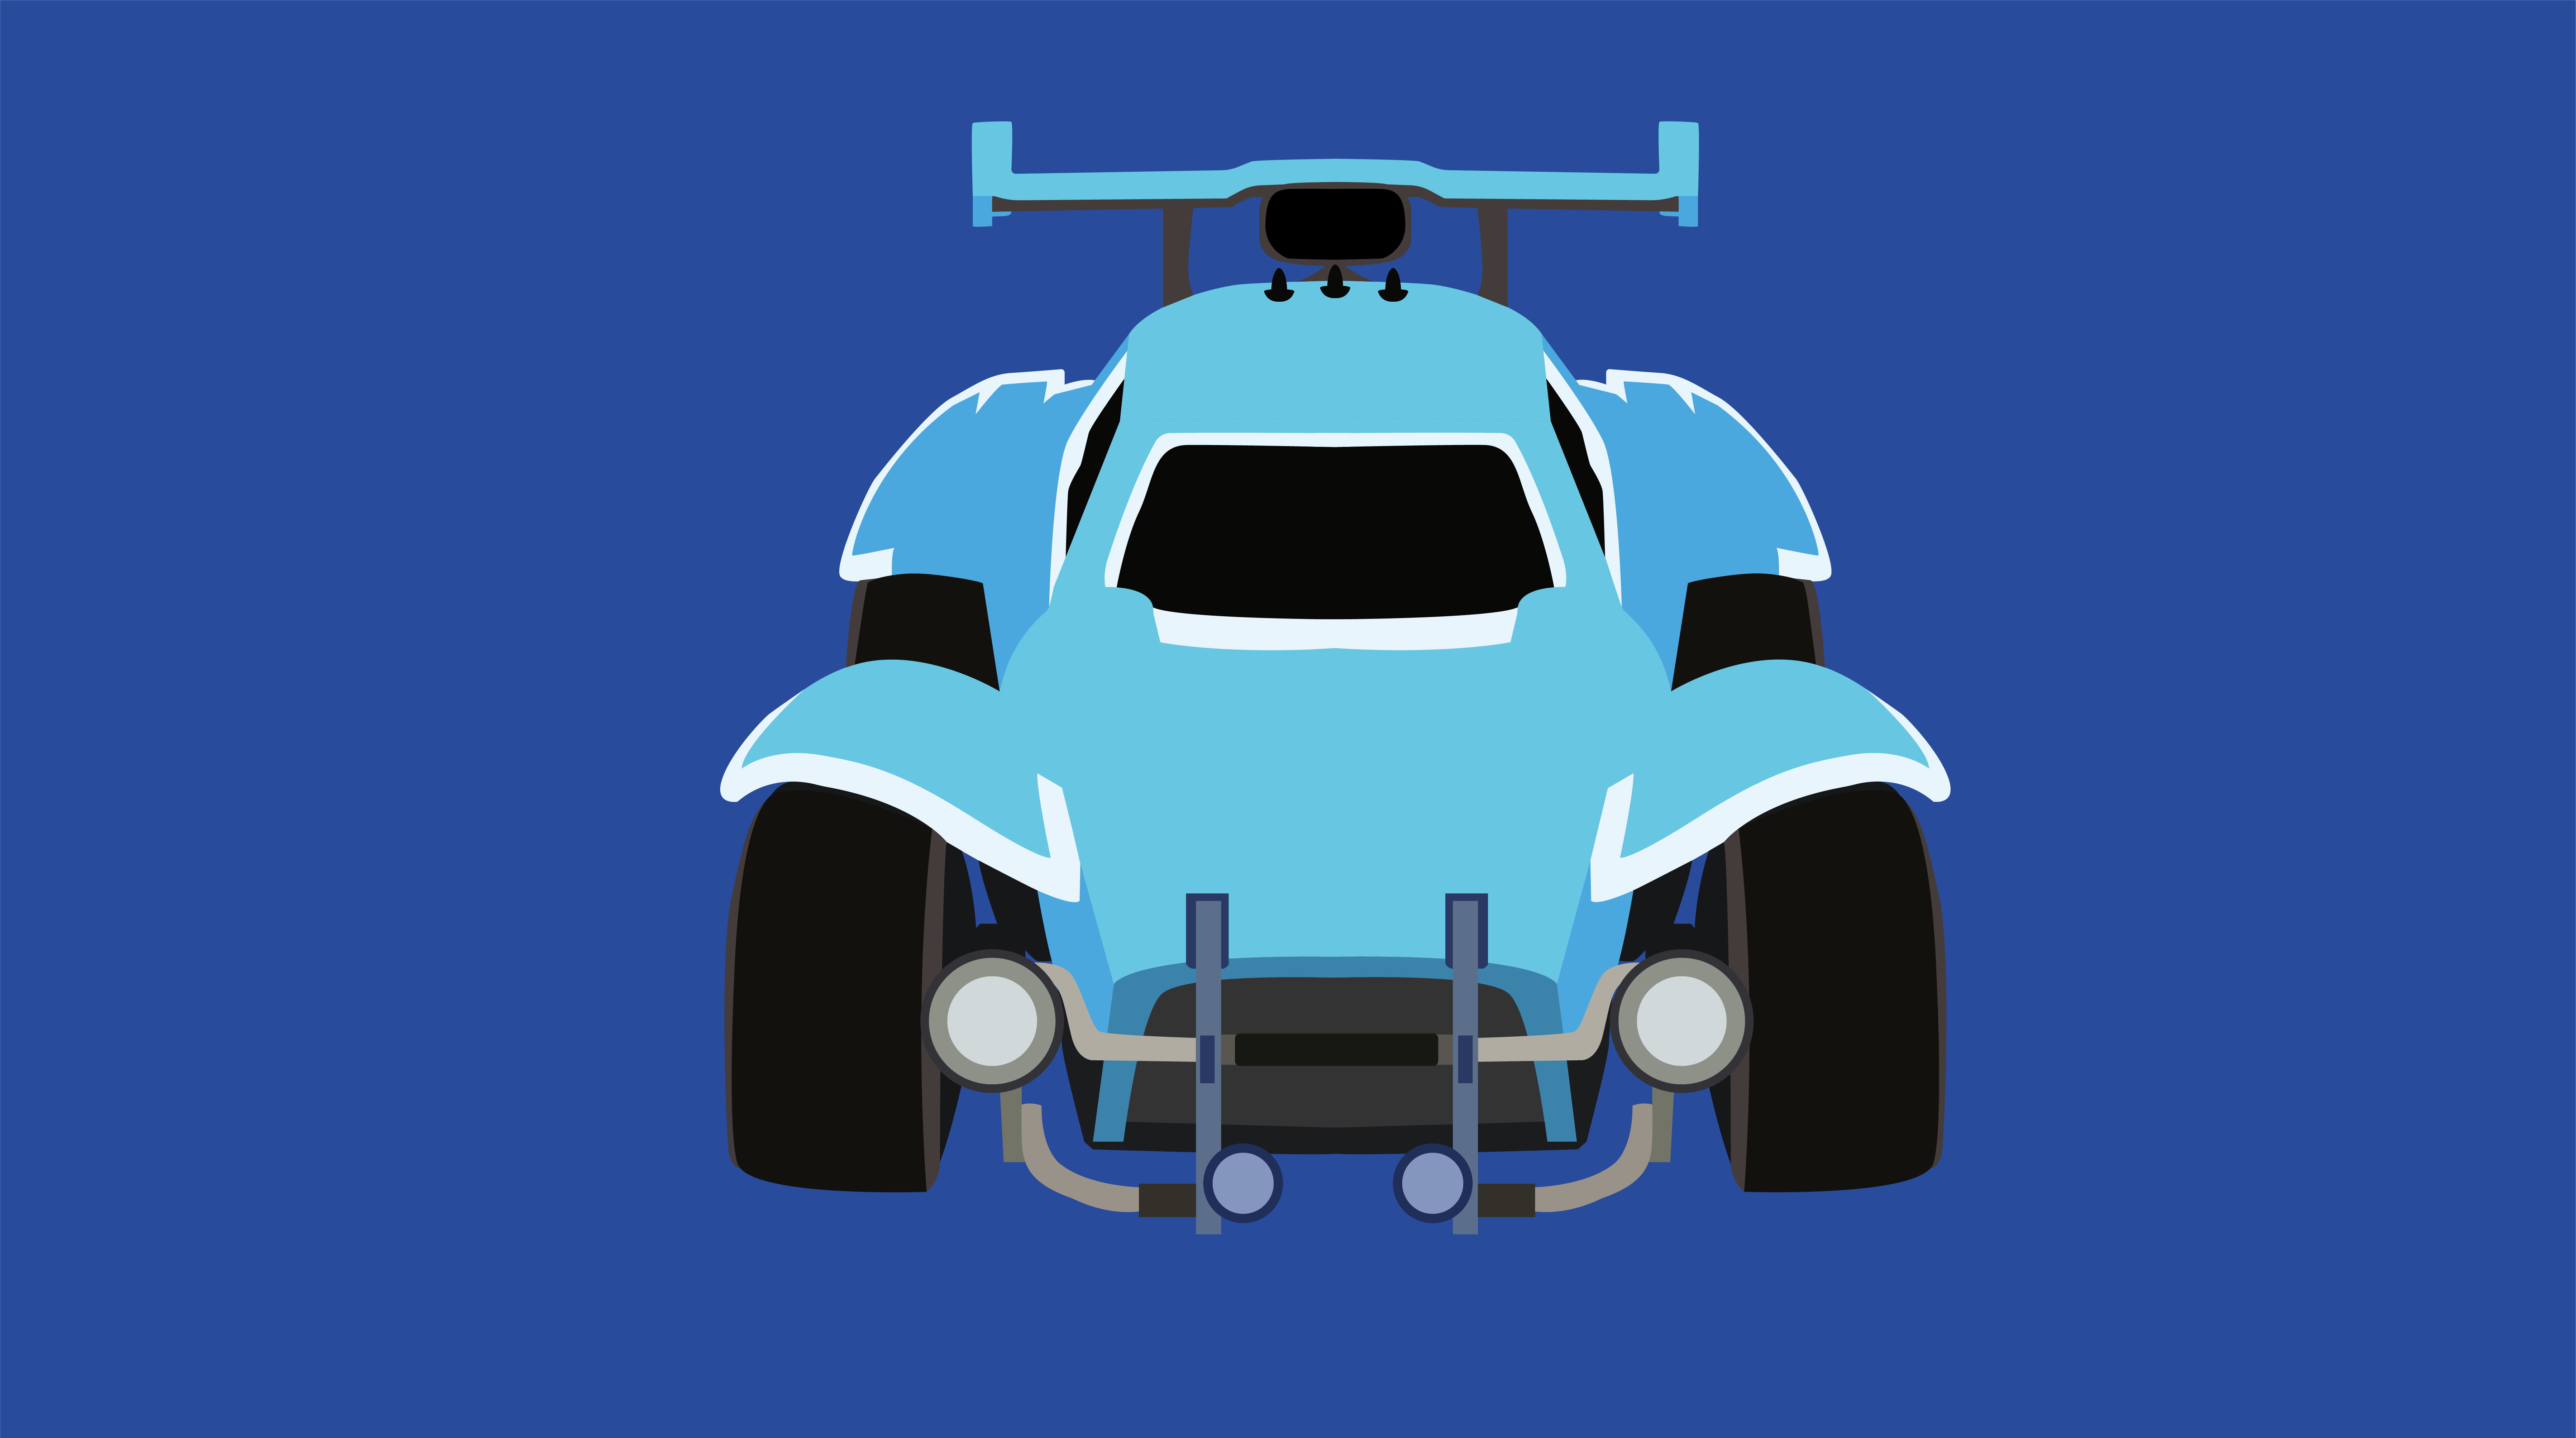 OC Octane Vector Art (Again!) Wallpaper available in my comment